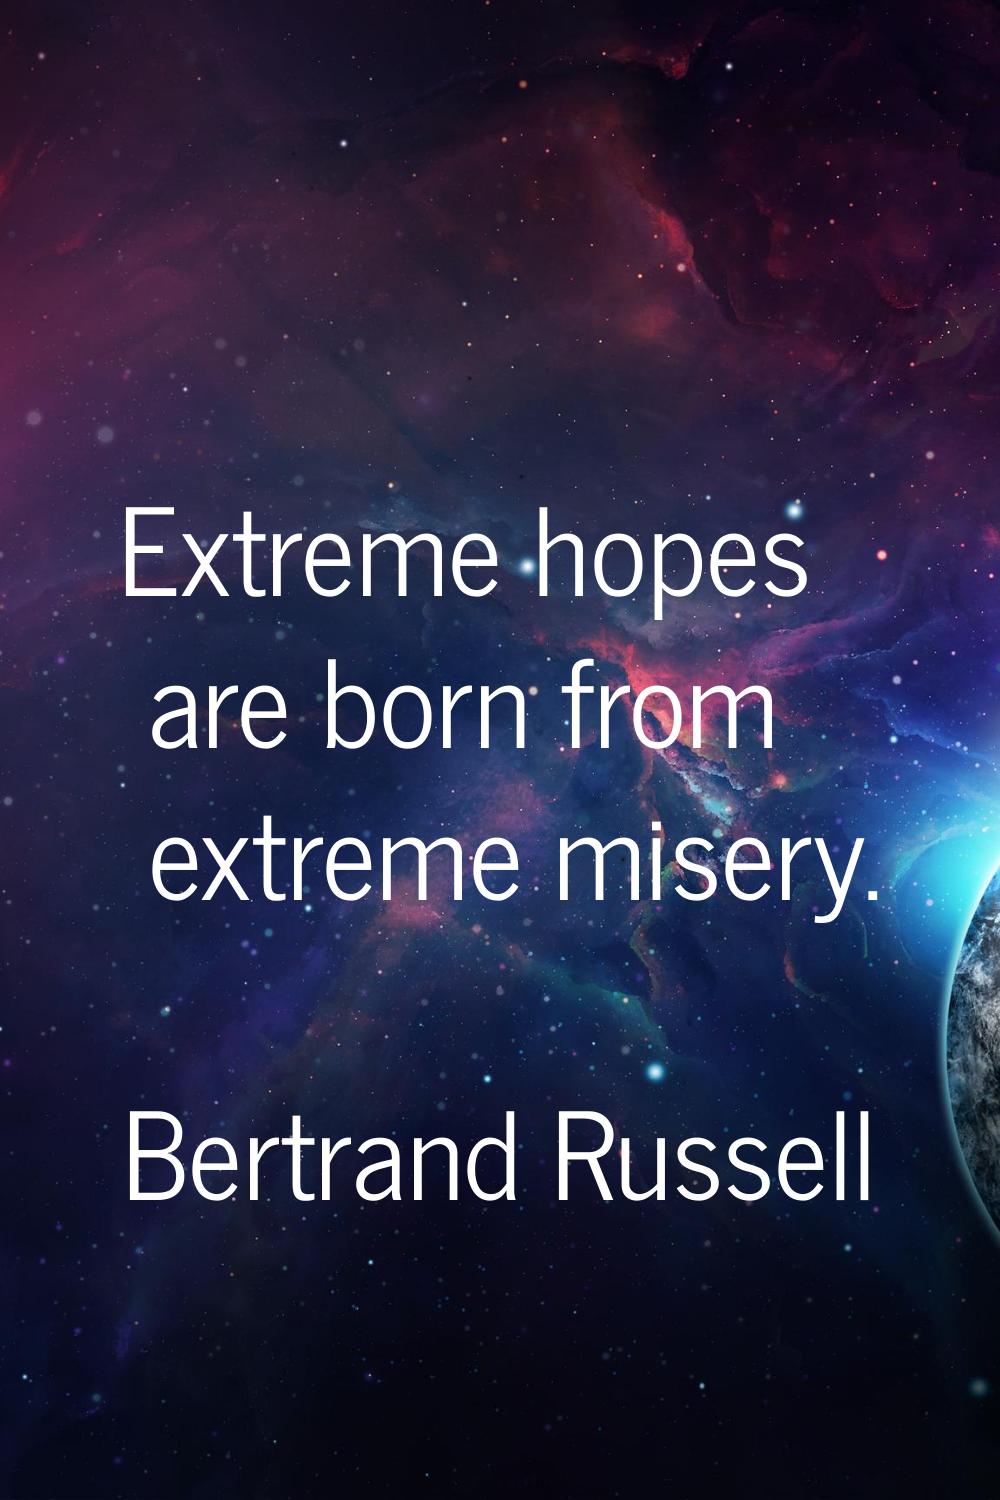 Extreme hopes are born from extreme misery.